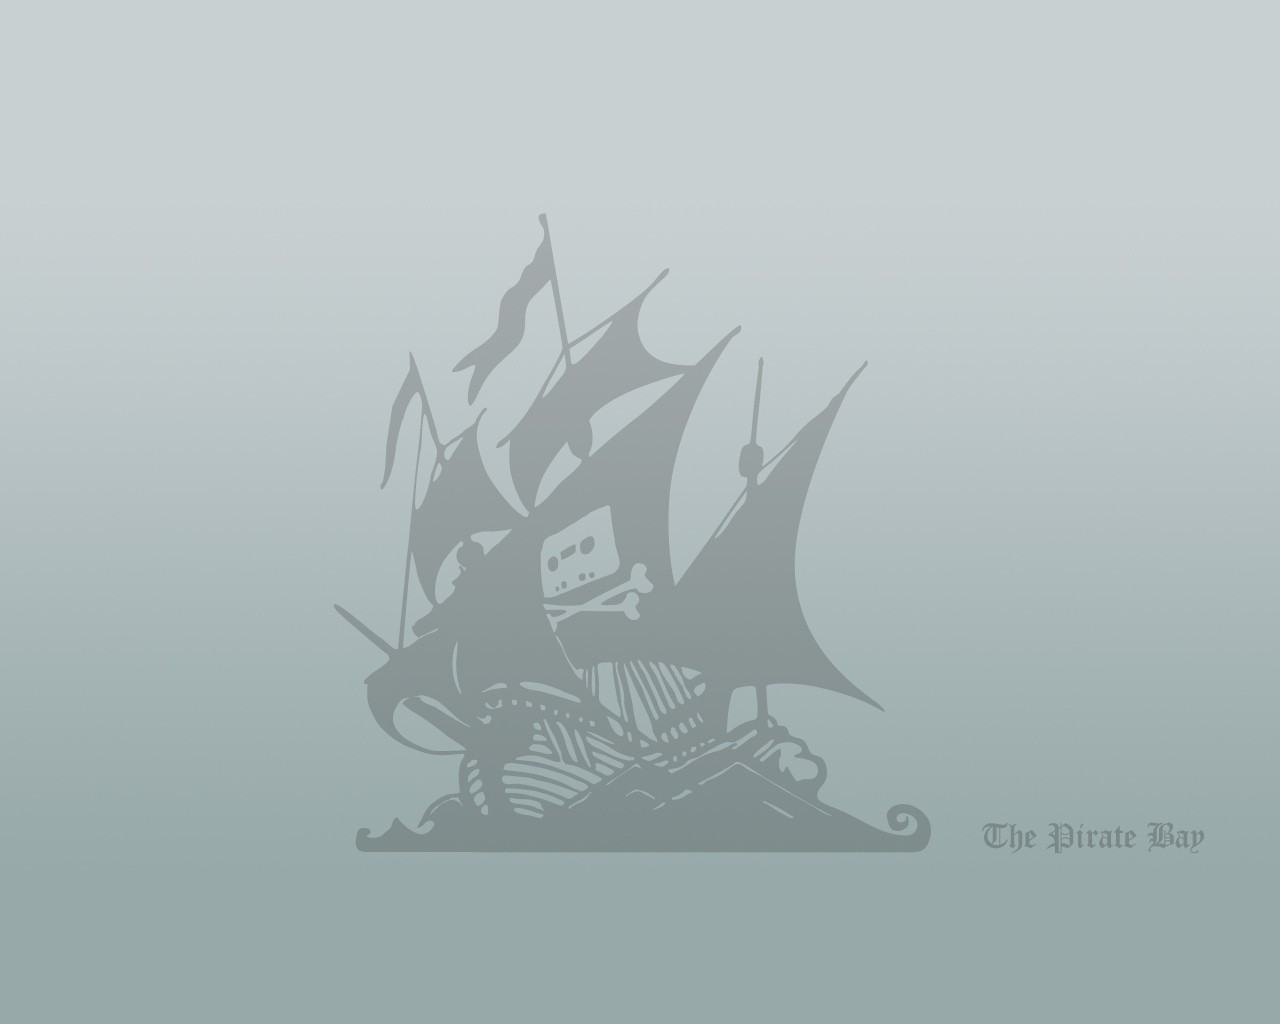 General 1280x1024 The Pirate Bay ship simple background vehicle sailing ship rigging (ship) artwork website